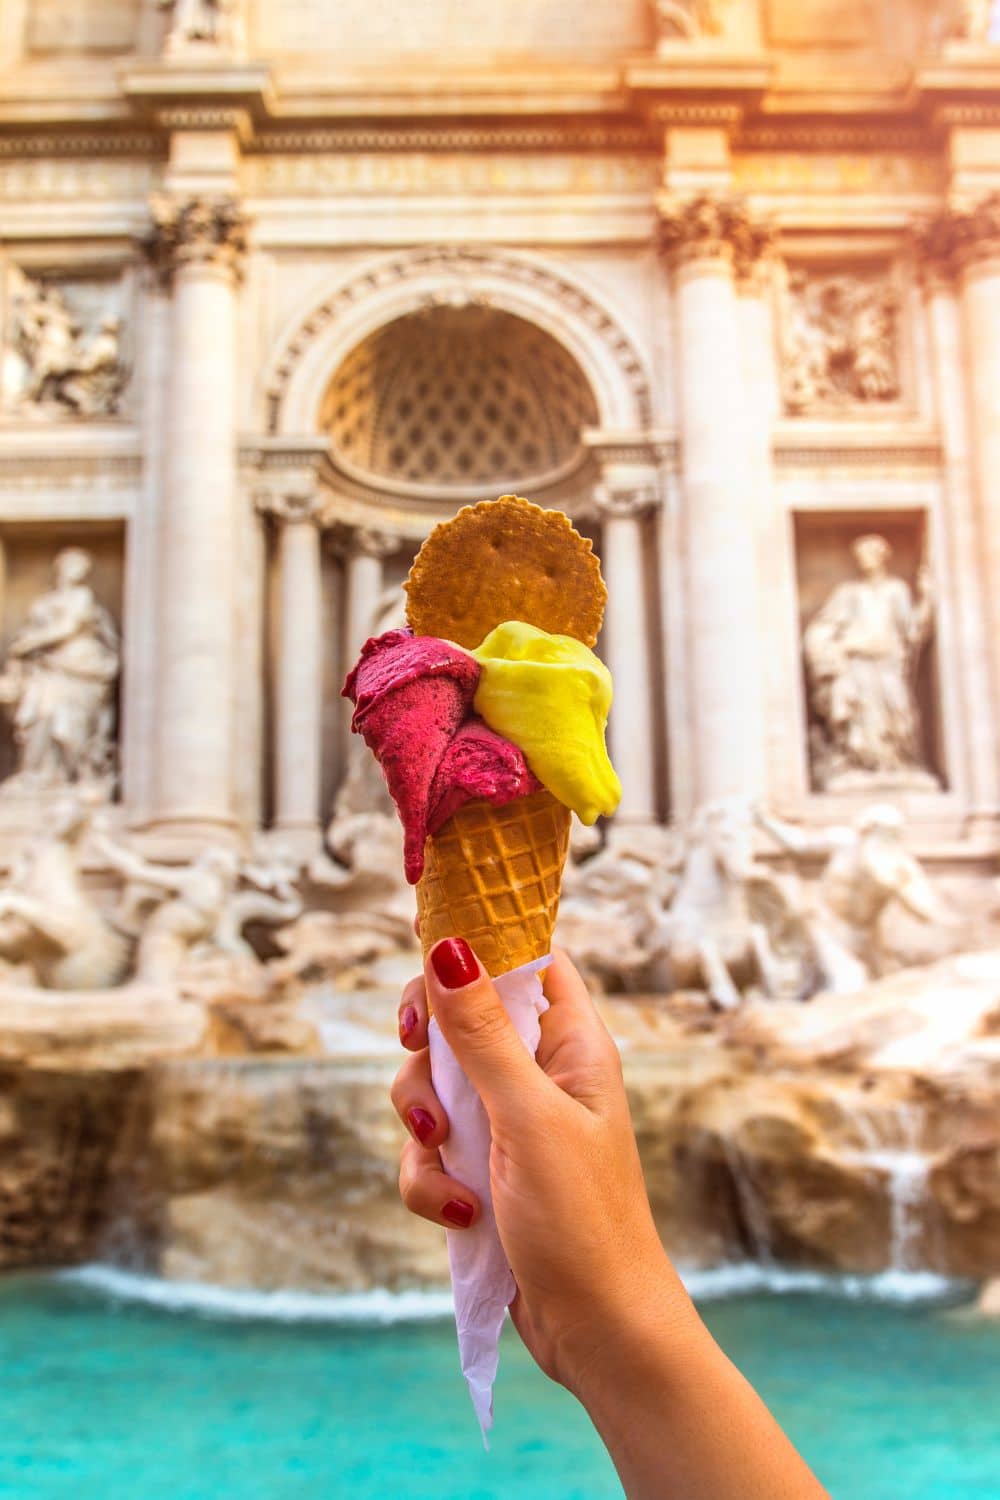 Enjoy Your Dream Family Fun Vacay Top Italy Tours You Shouldn't Miss